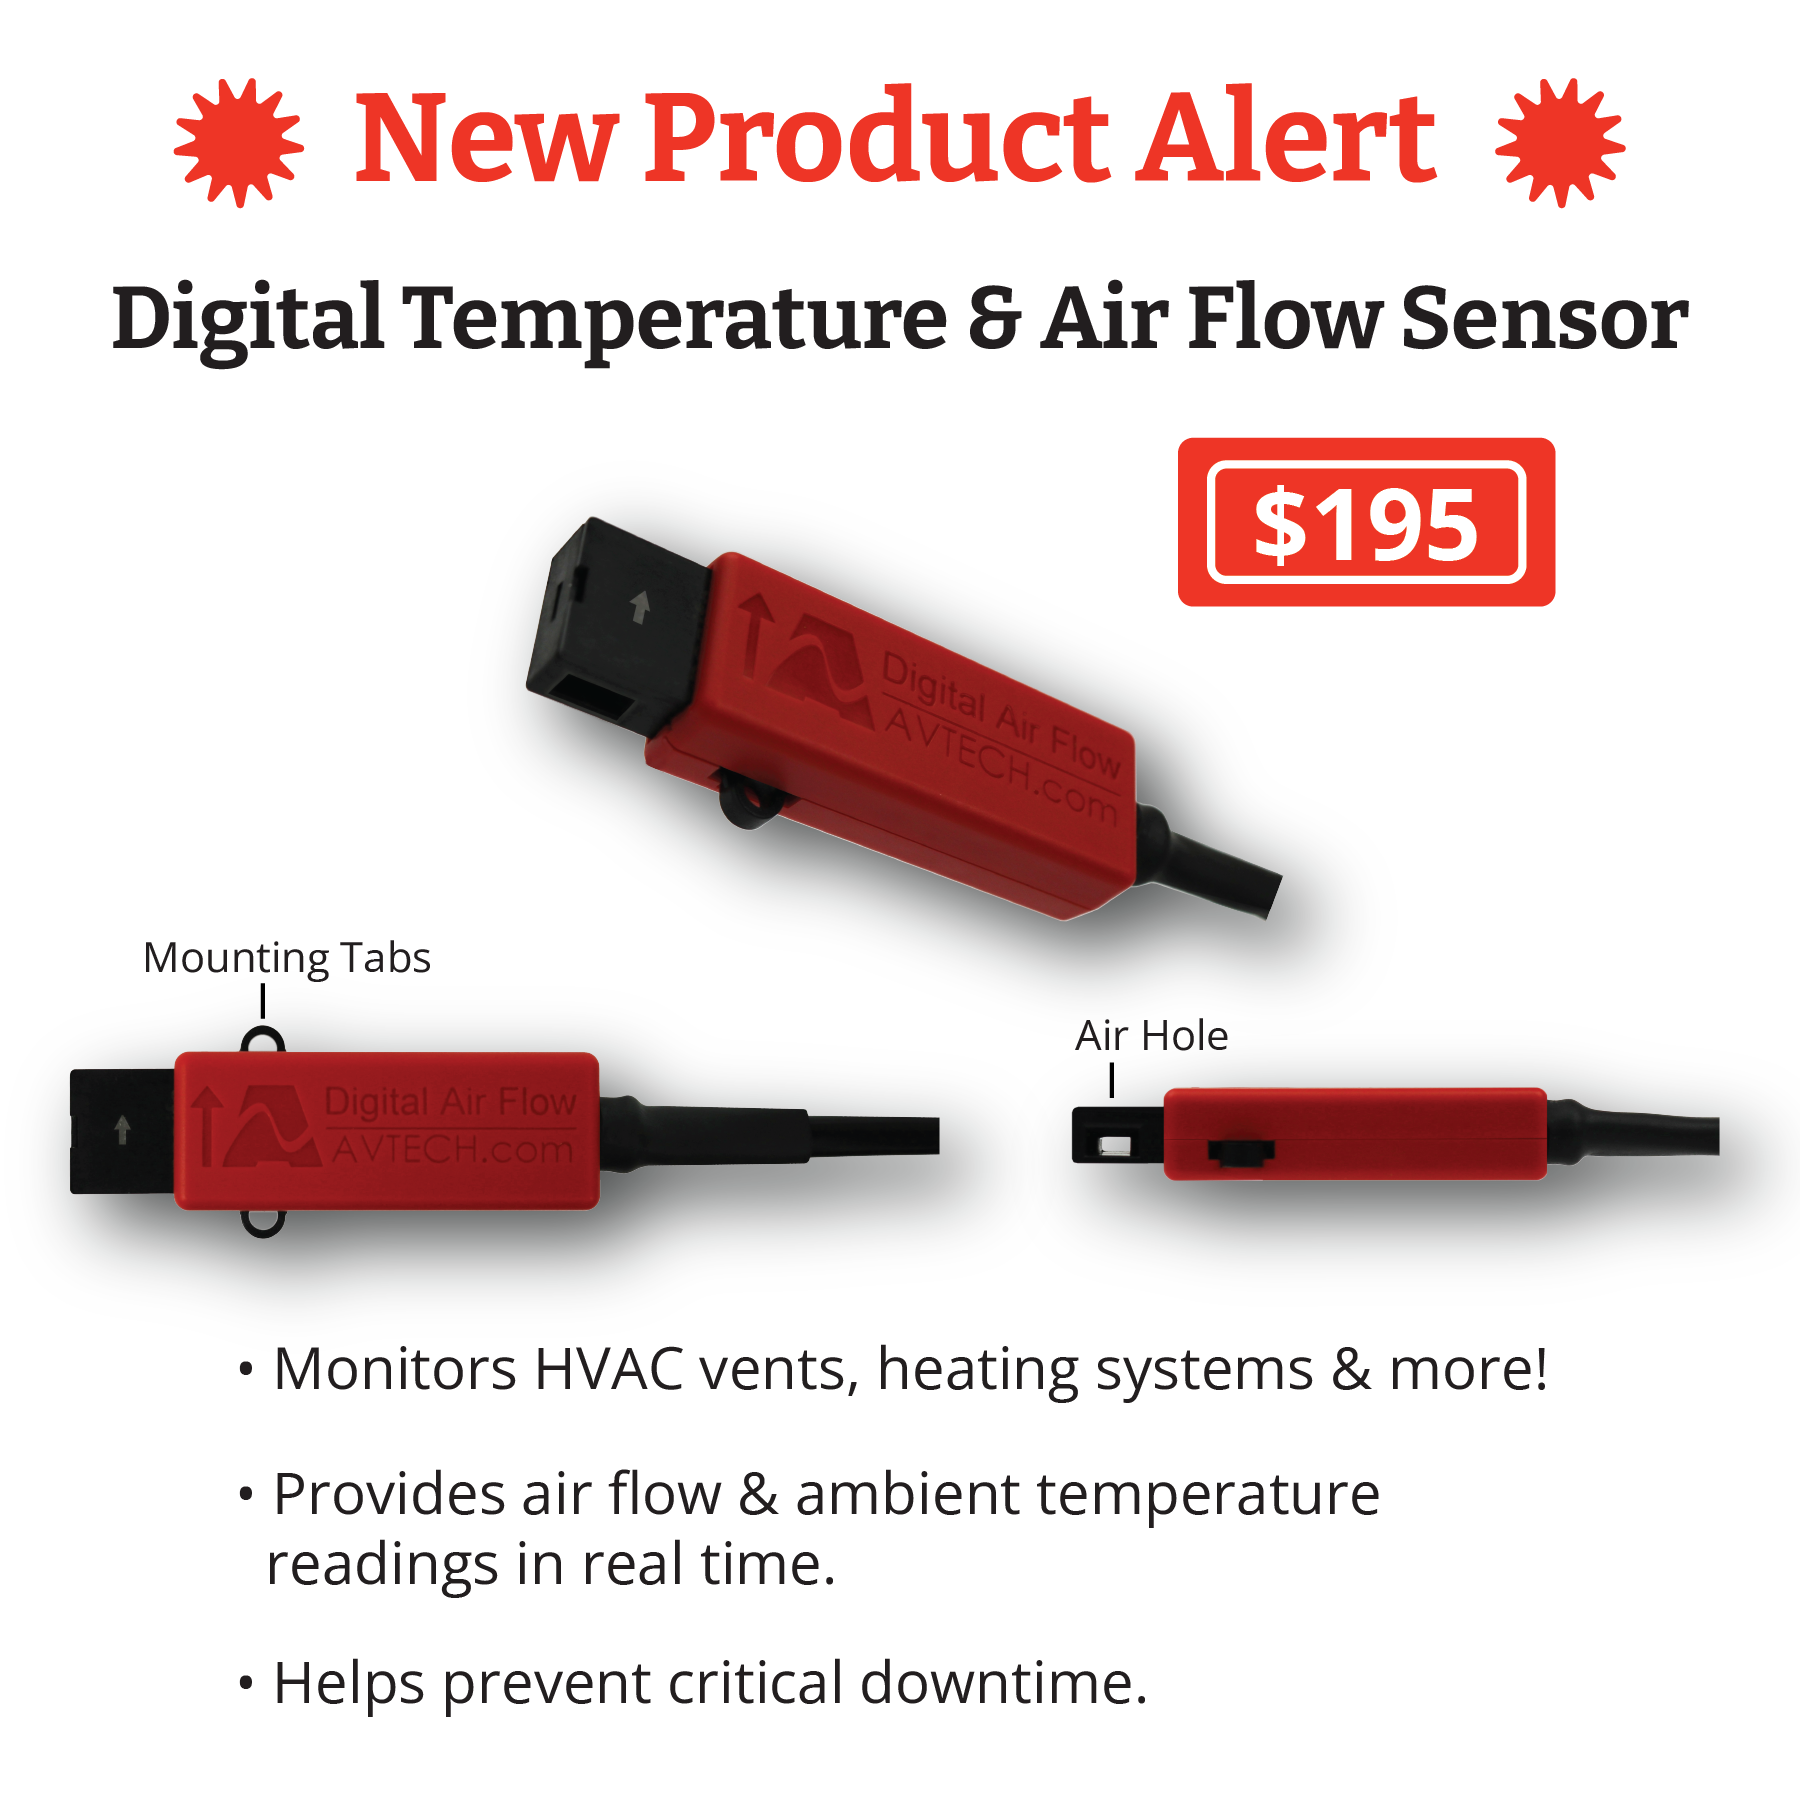 Accurately Monitor Air Flow For Fans, HVAC Vents & More - Digital  Temperature & Air Flow Sensor - AVTECH